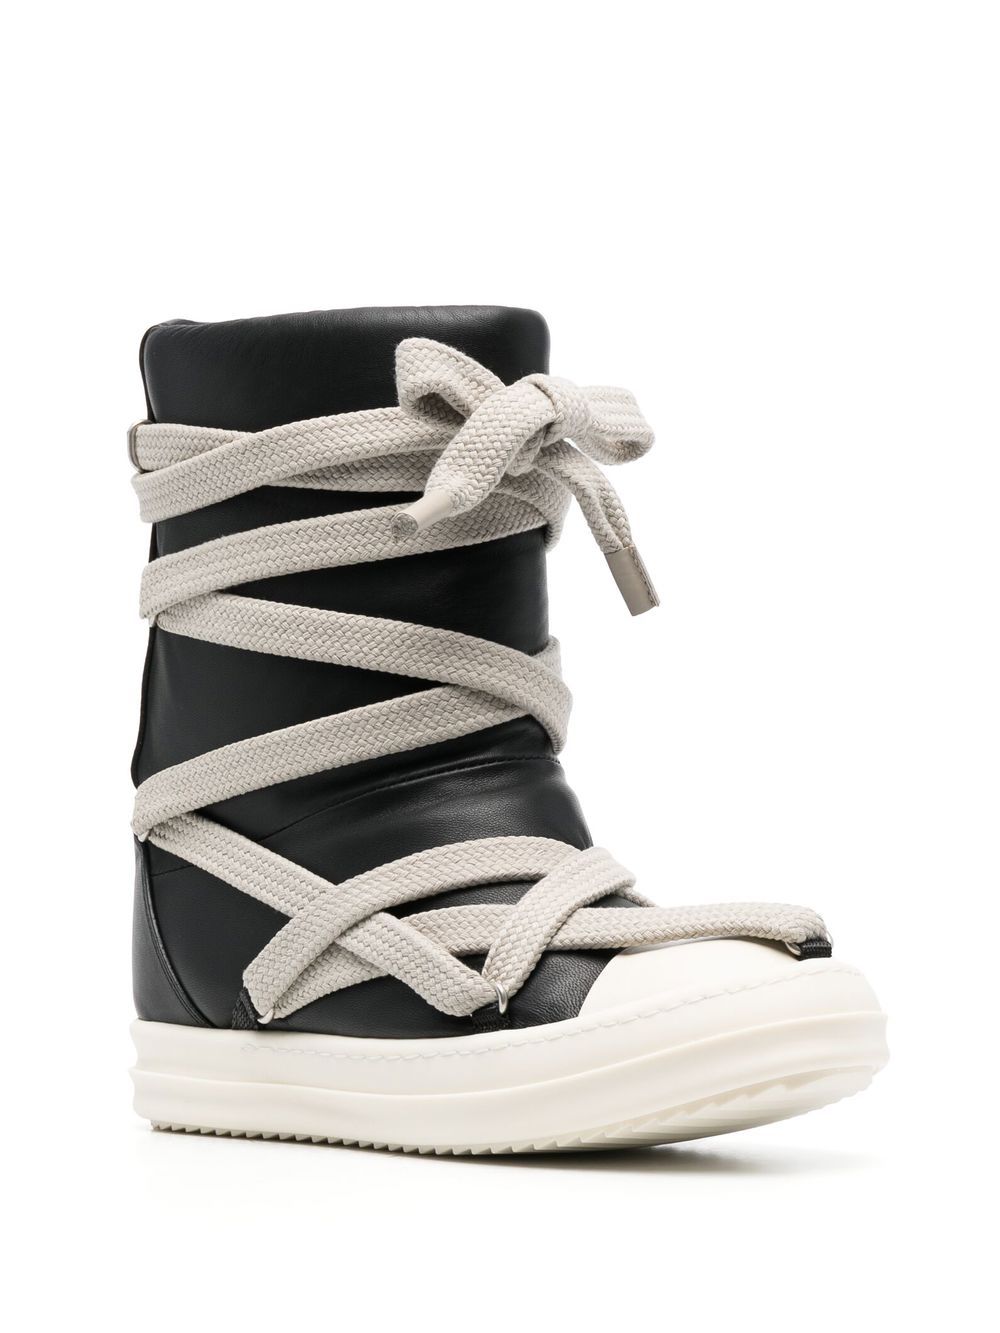 Image 2 of Rick Owens Jumbo Puffer mega-laced sneaker boots